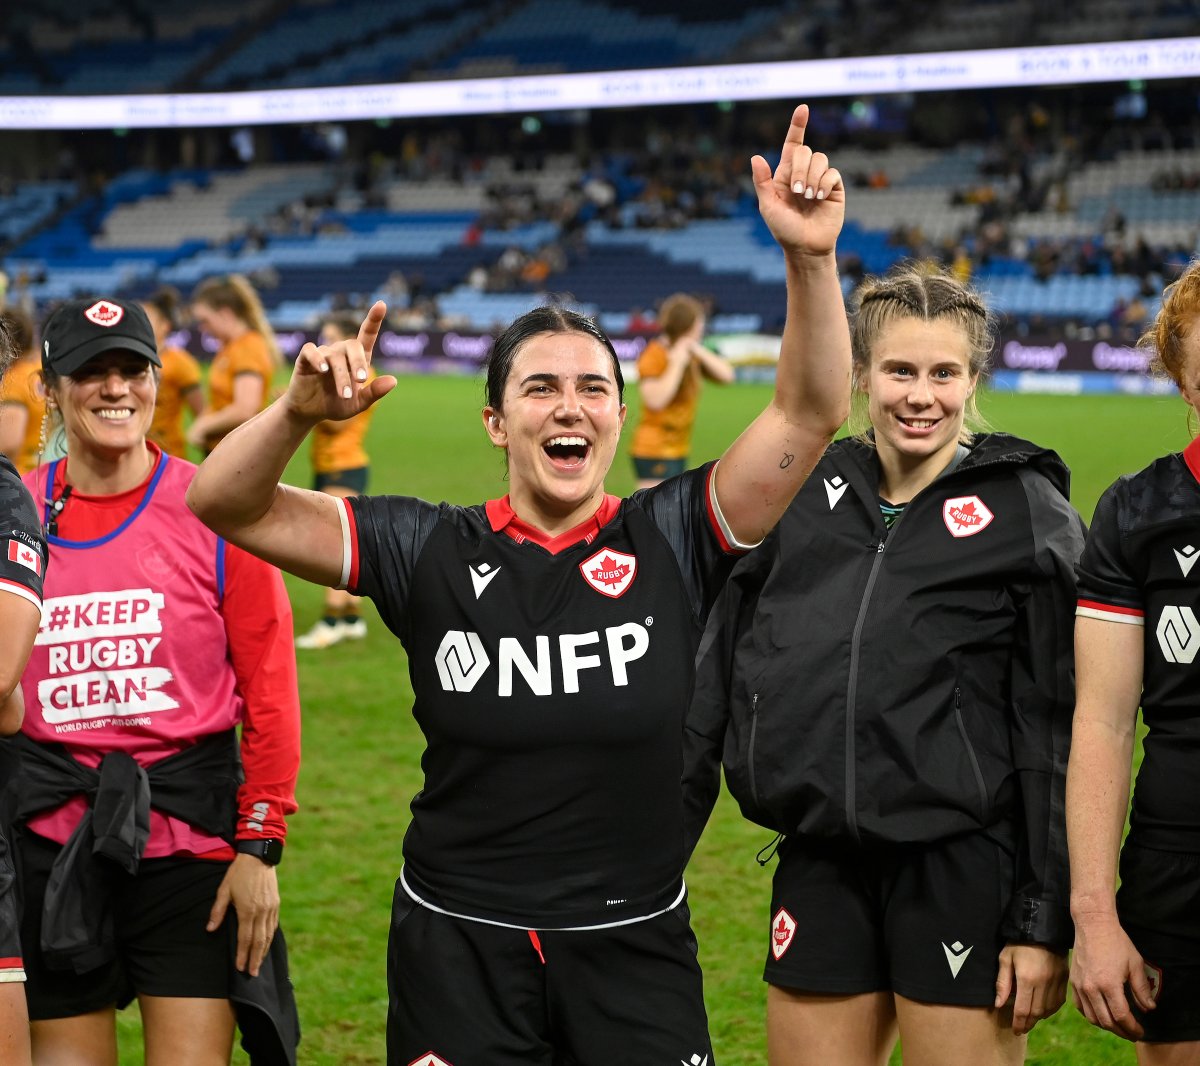 Canada’s Women’s Rugby Team took a 33-14 win over Australia which moves them above France into third place in the world rankings and secures their spot in WXV 1 later this year, which is being hosted in Vancouver⬆️🌎 

🗞️: bit.ly/44B7Iq6

#RugbyCA | #OneSquad | @nfpca